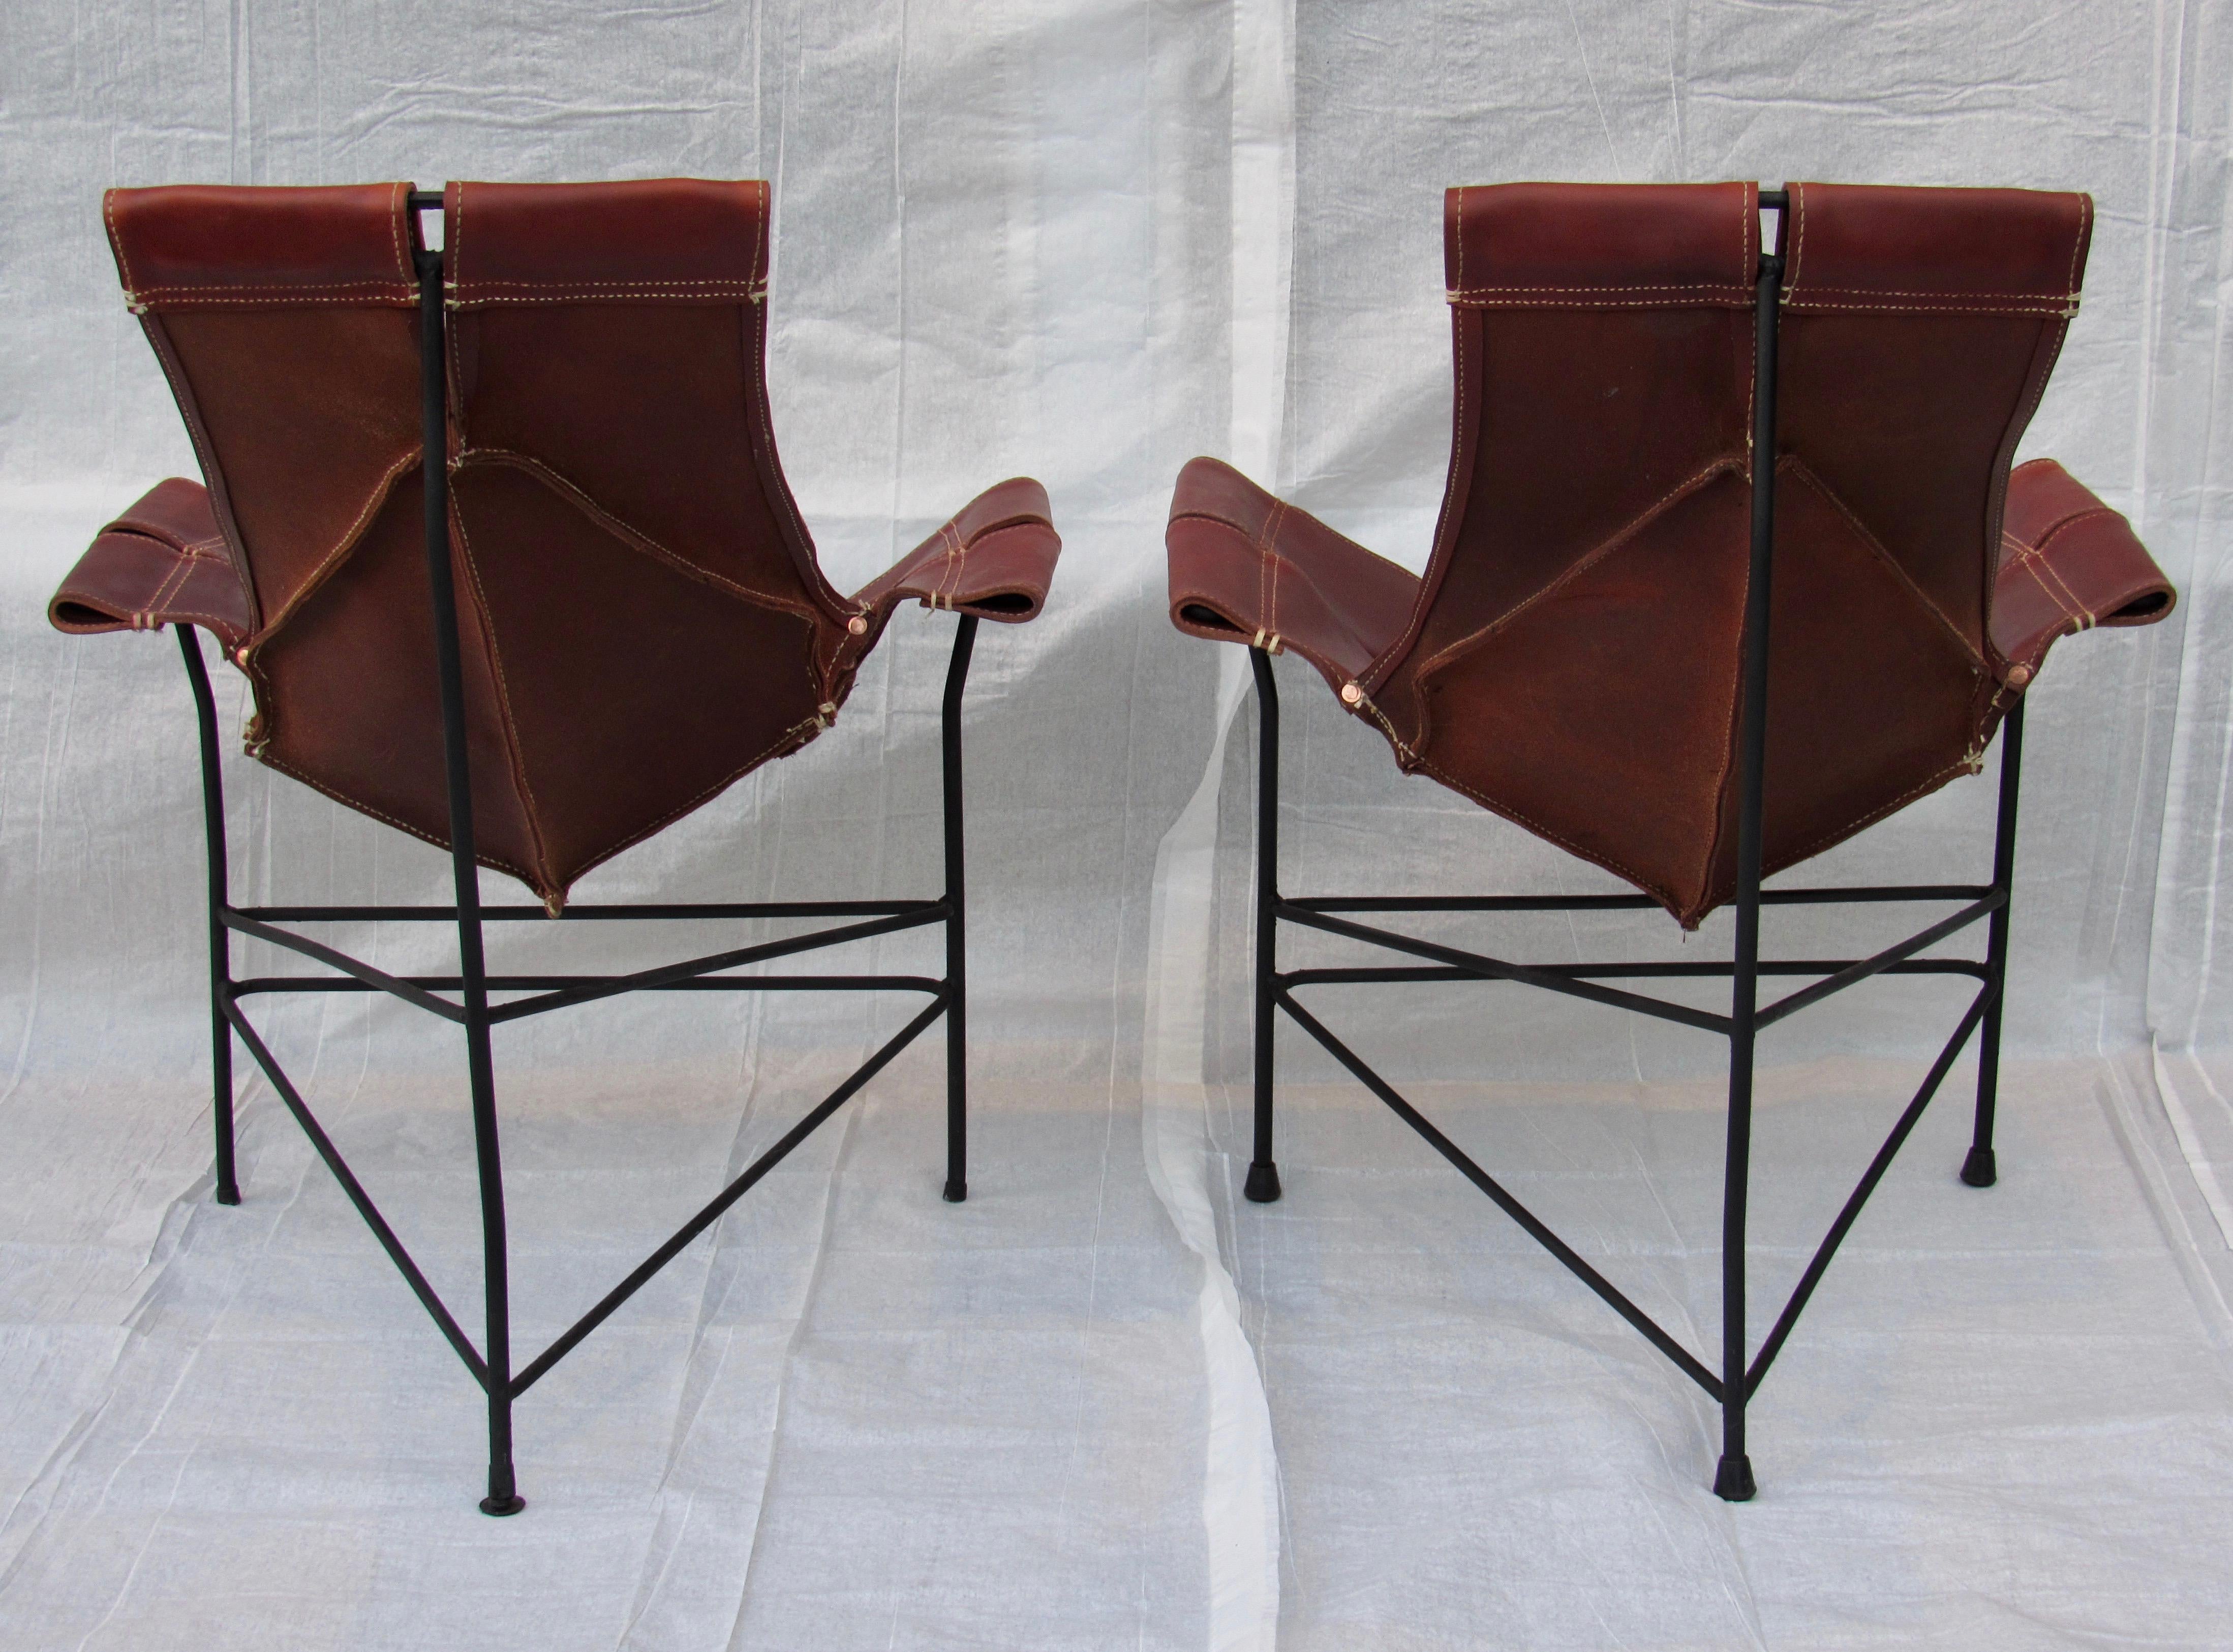 Hand-Crafted Wrought Iron Jerry Johnson Leather Sling Lounge Chair (3) Leathercraft 1954 For Sale